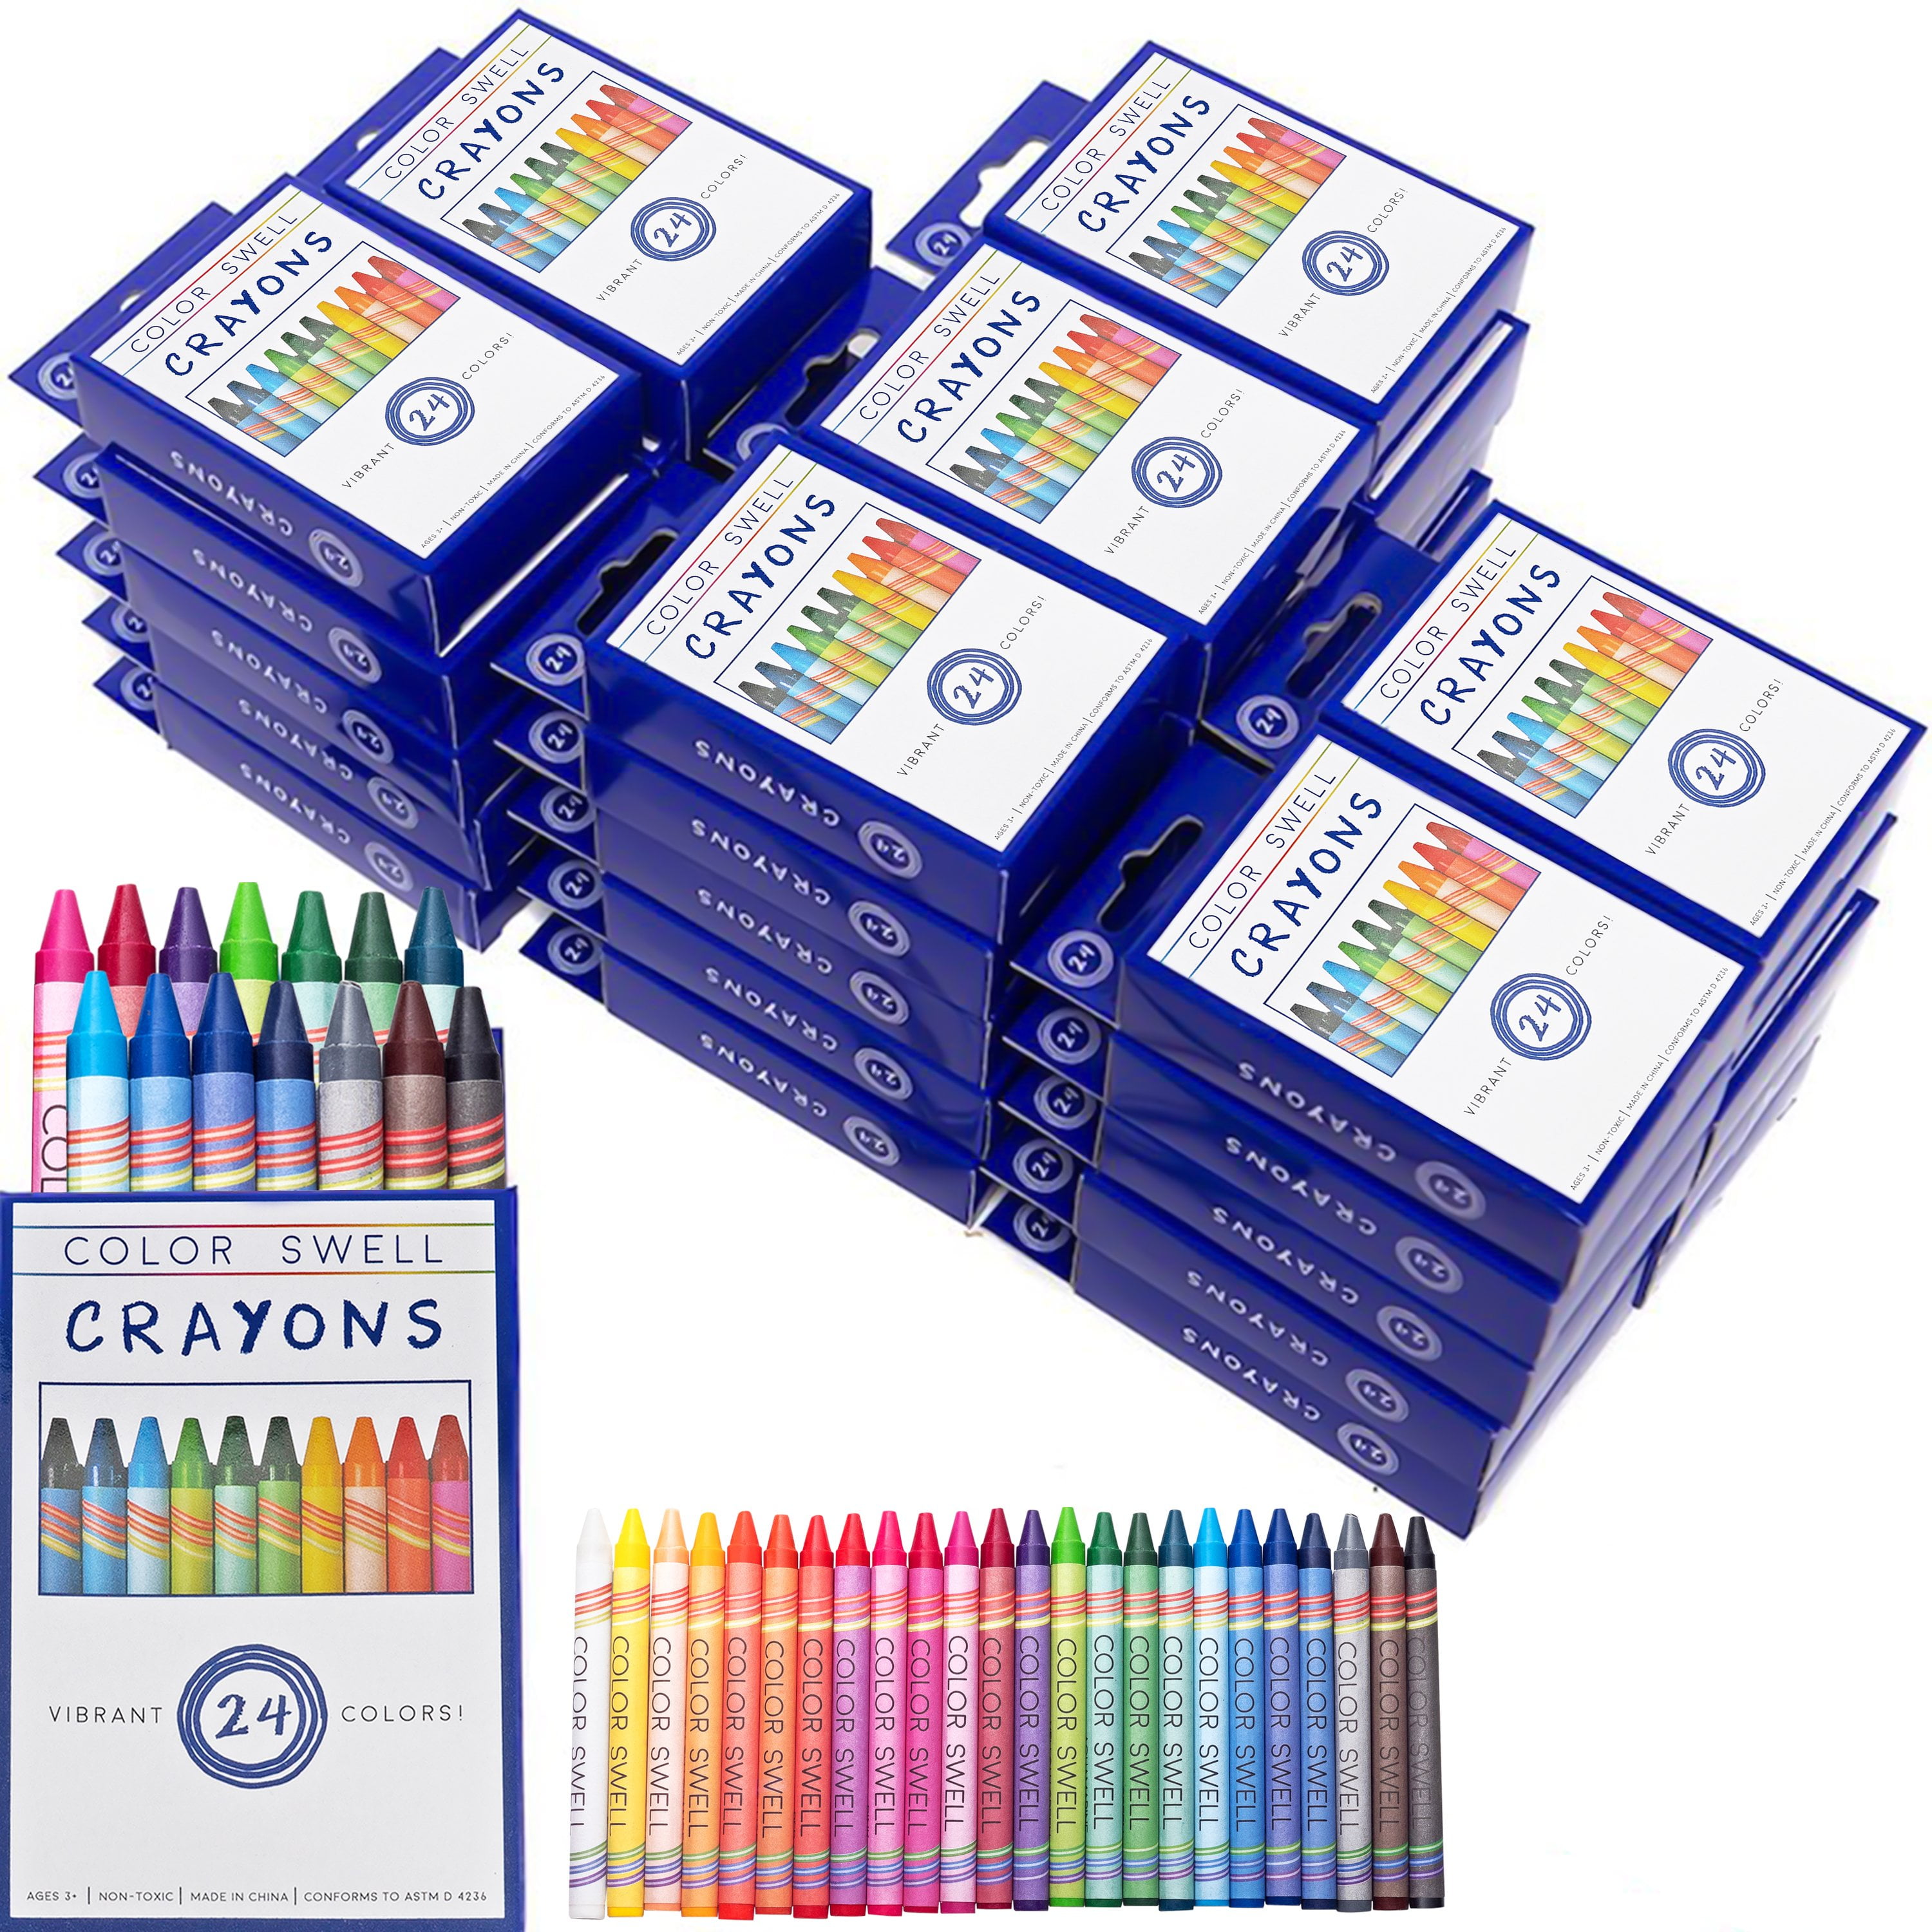  deli Toddler Crayons Rocket Non-Toxic Crayons for Toddlers Age  1 and Older Washable Crayons Painting Drawing & Art Supplies,24 Packs  Crayons (24) : Toys & Games